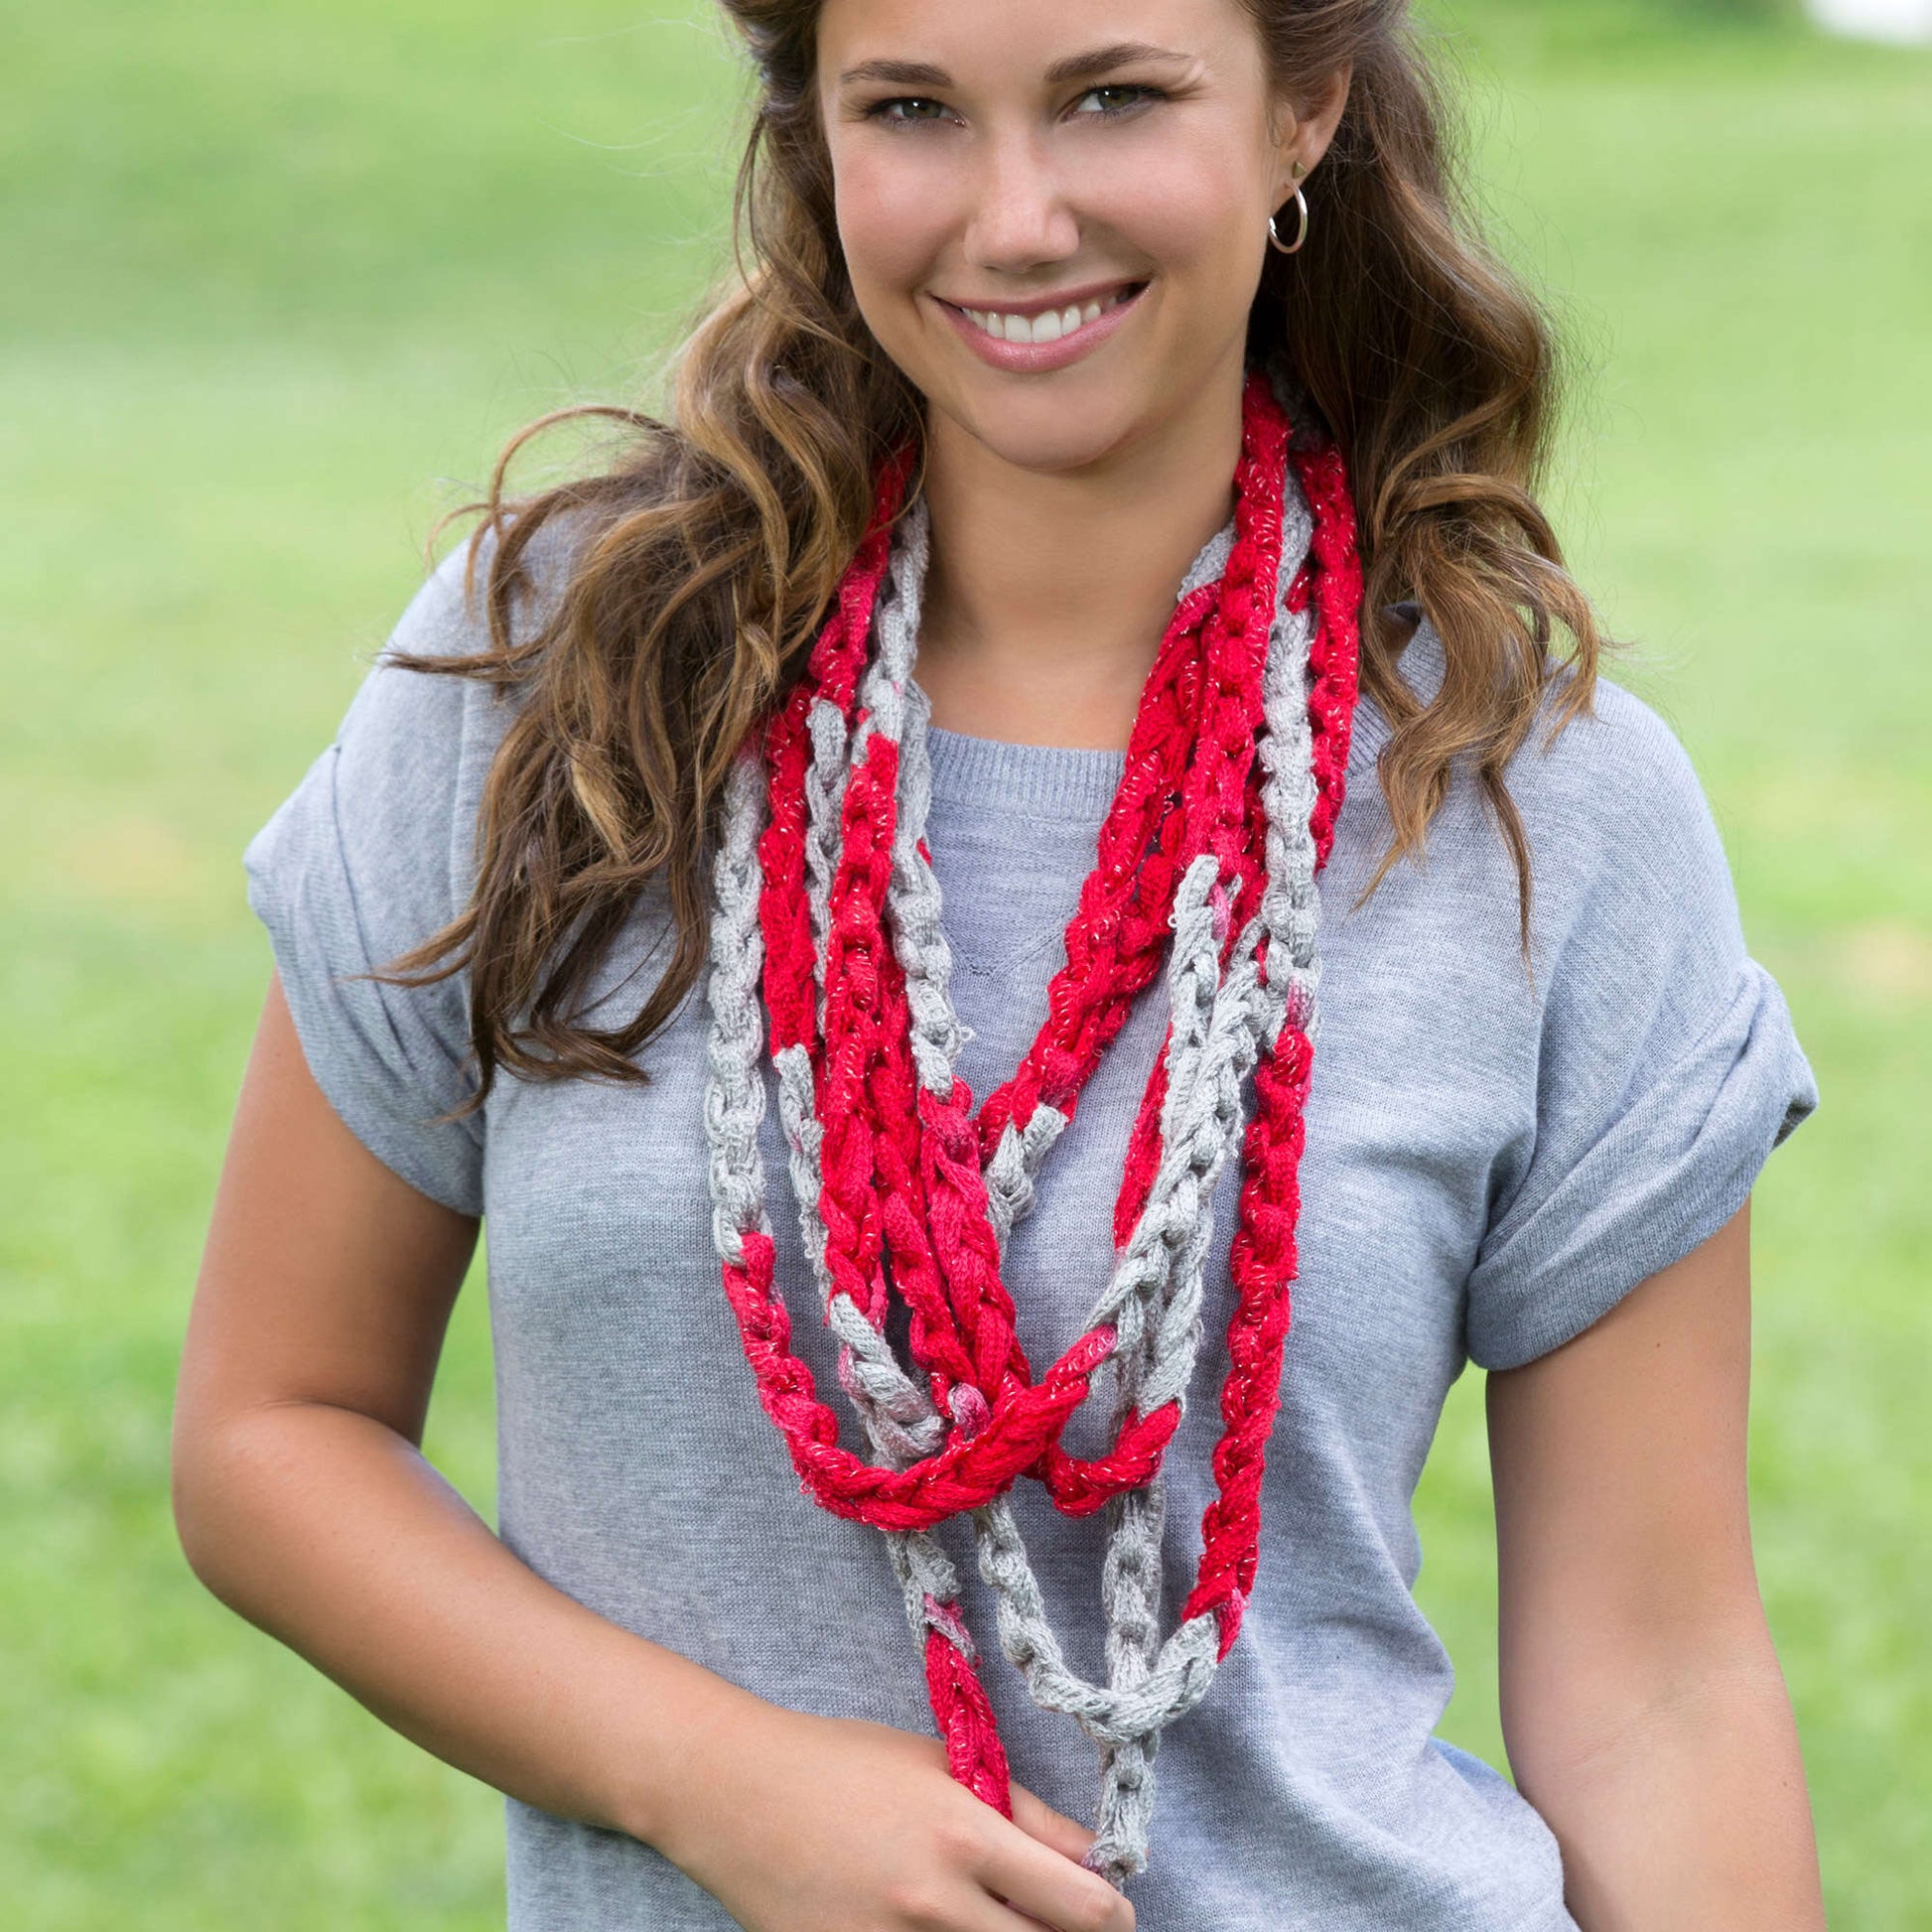 Free Red Heart Craft Go Team Hand Chain Scarf Pattern